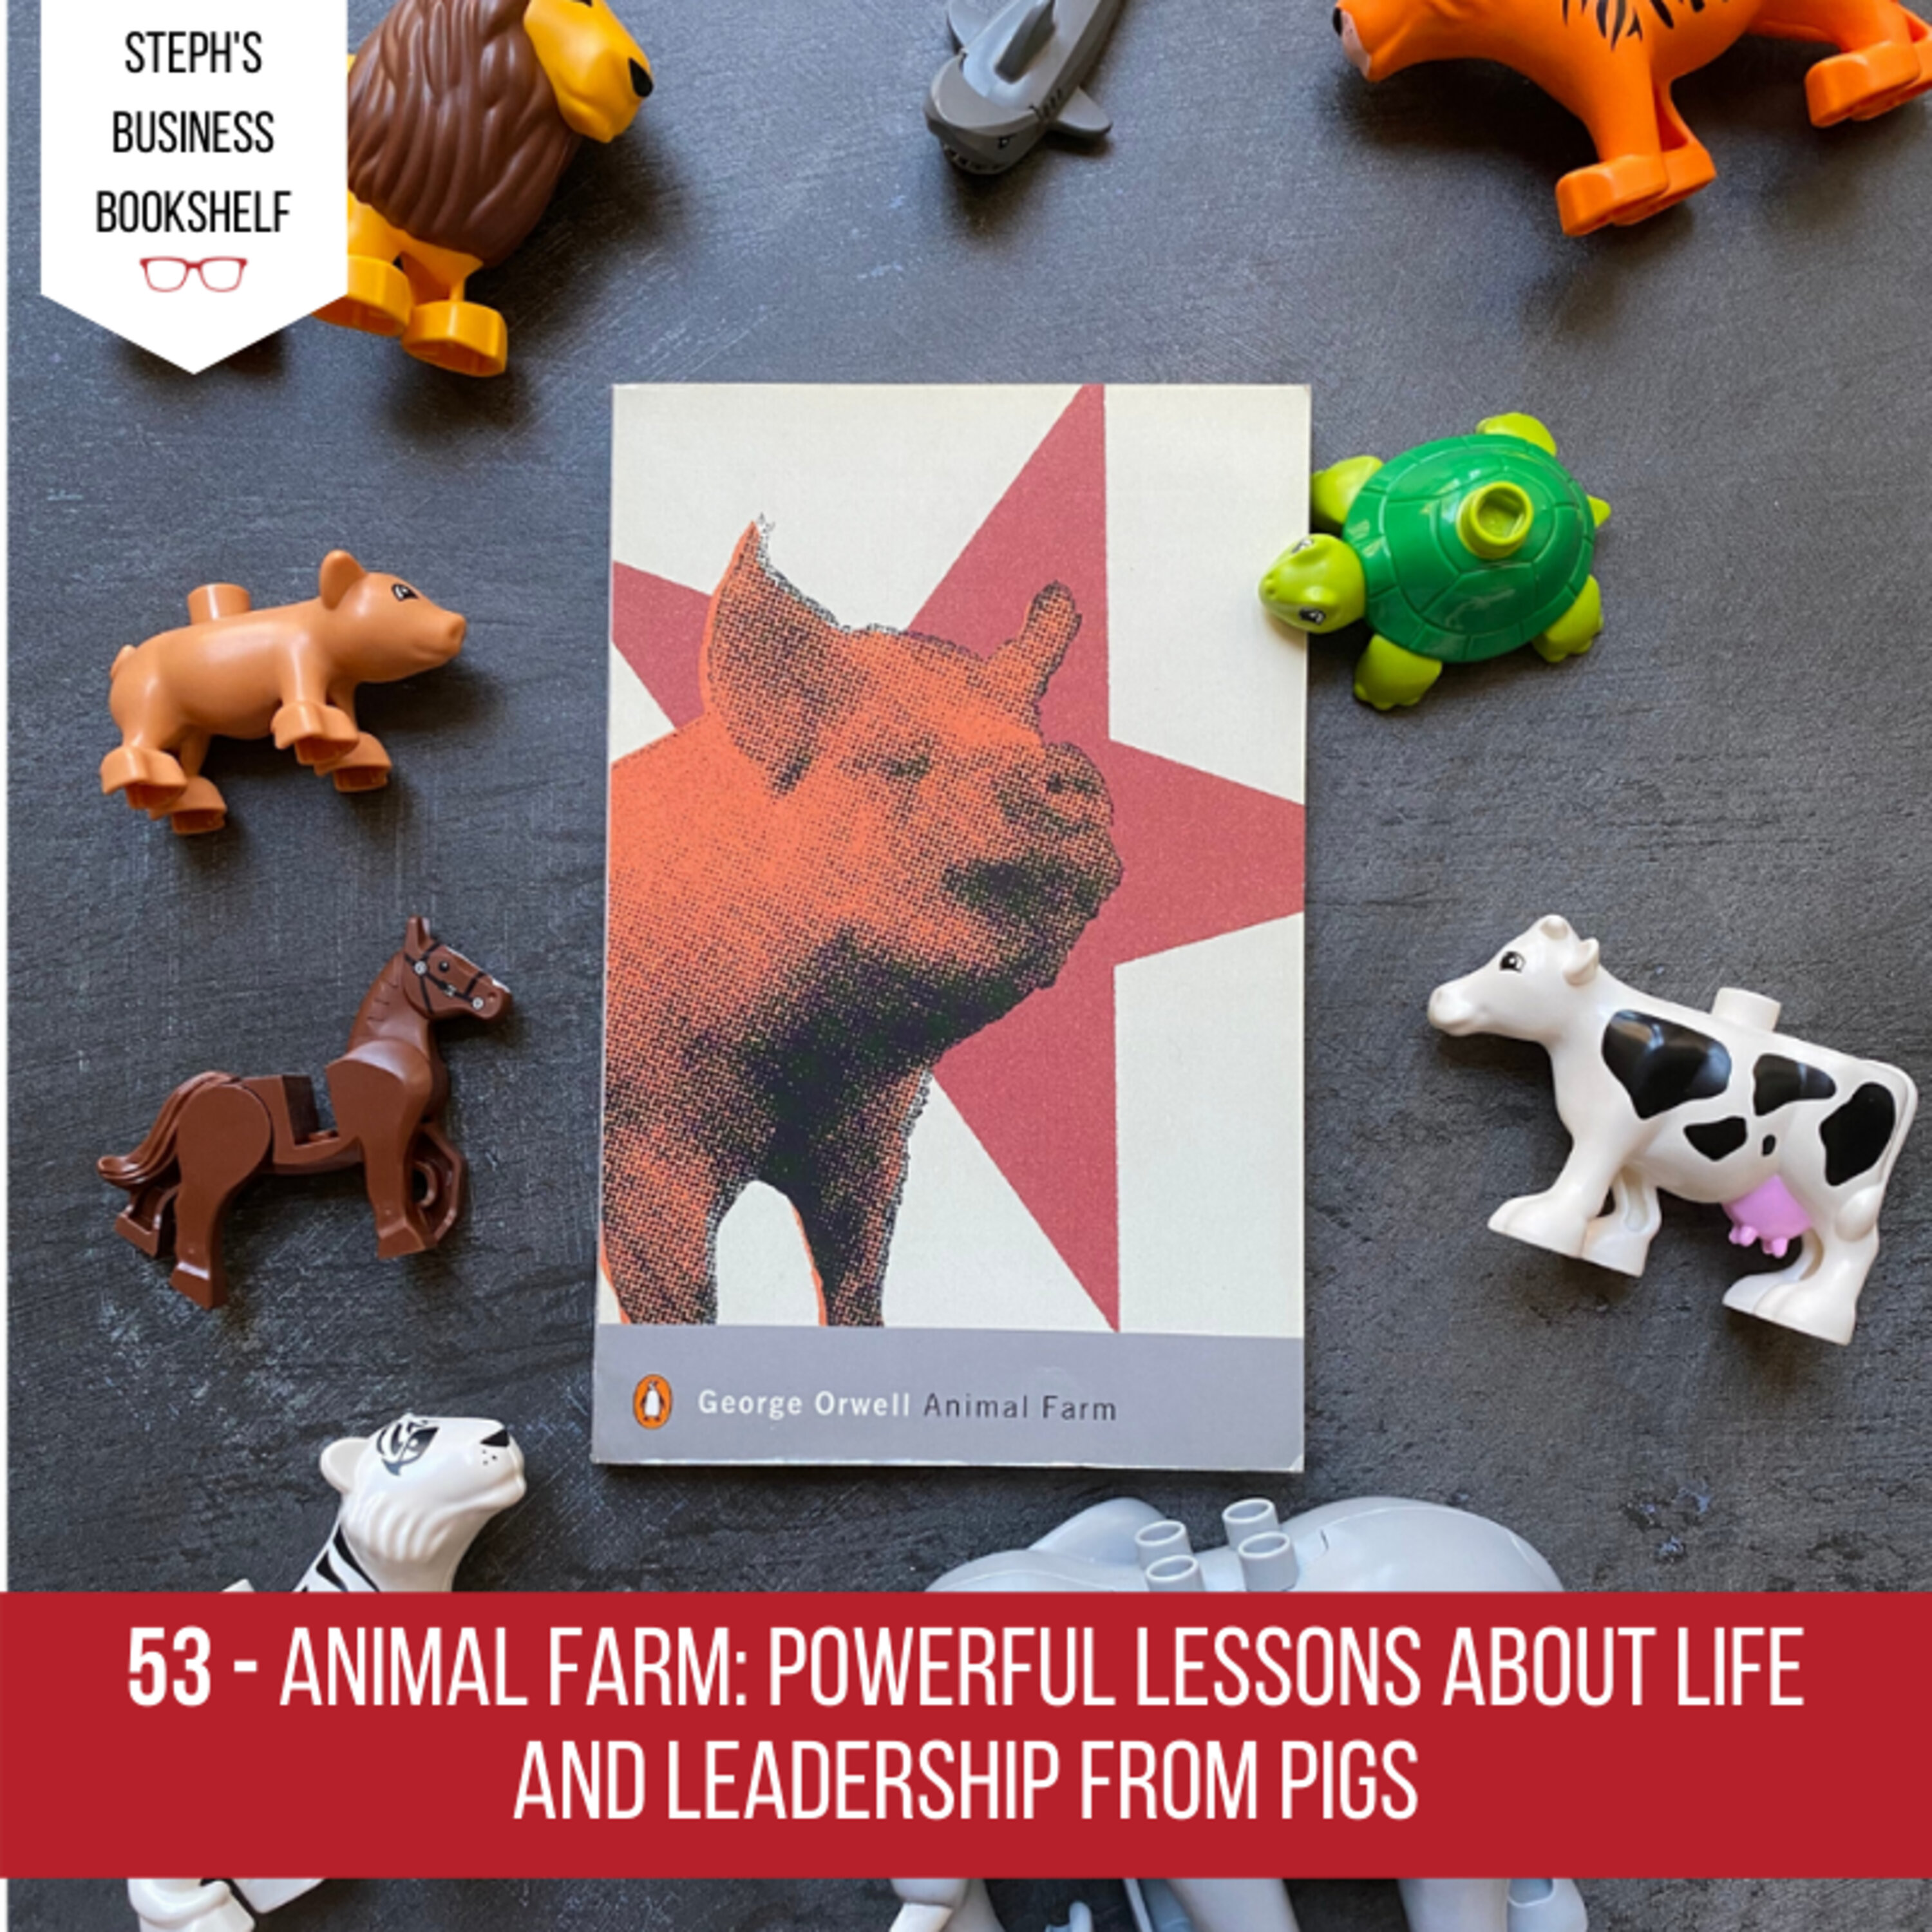 Animal Farm by George Orwell: Powerful lessons about life and leadership from pigs Image